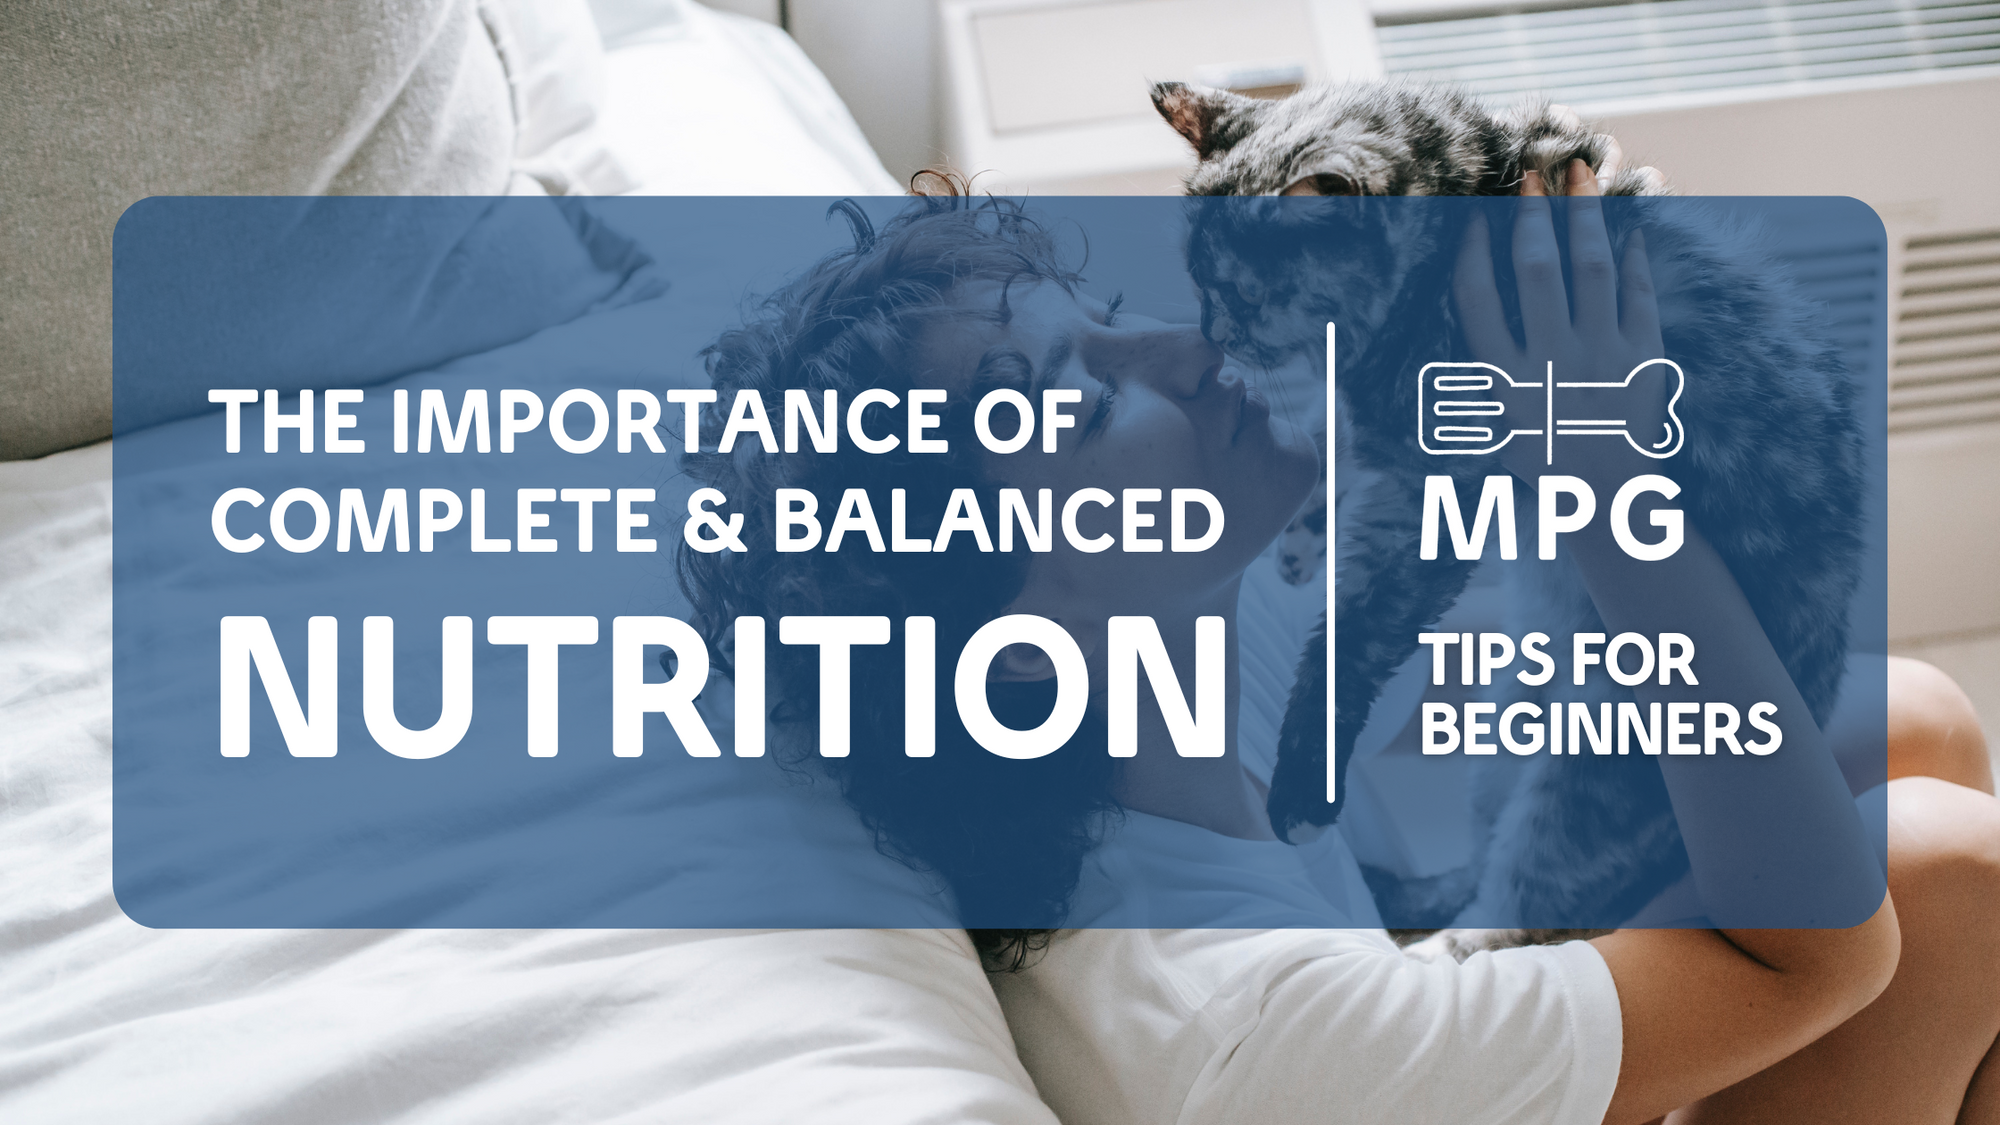 Why Is Complete and Balanced Nutrition So Important?